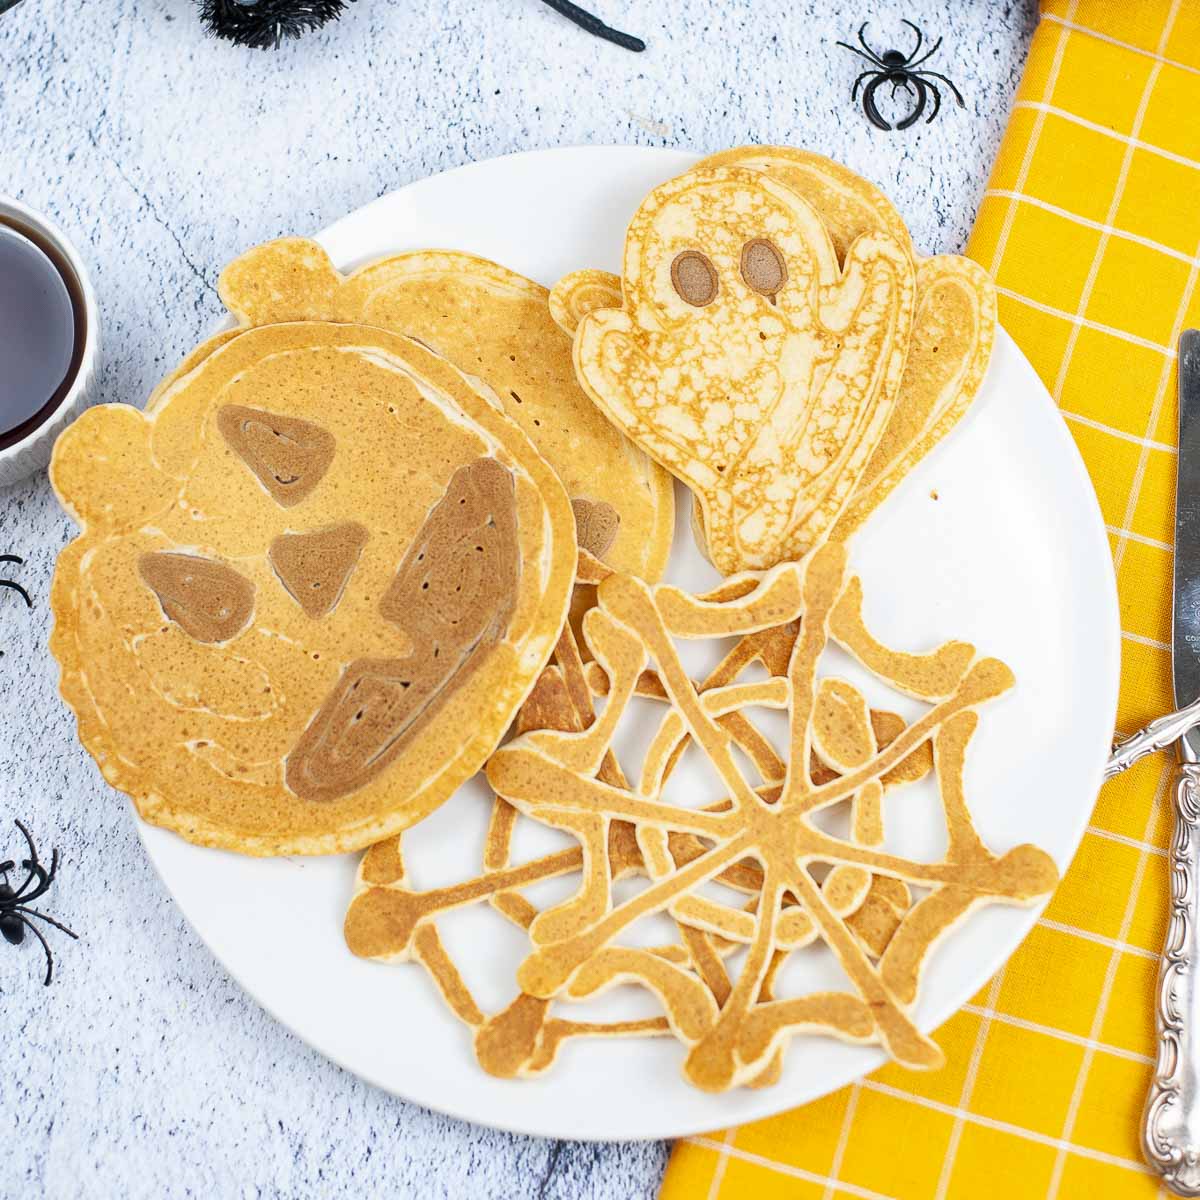 A plate with a spider web pancake, a Jack o lantern pancake, and a ghost pancake for Halloween breakfast.